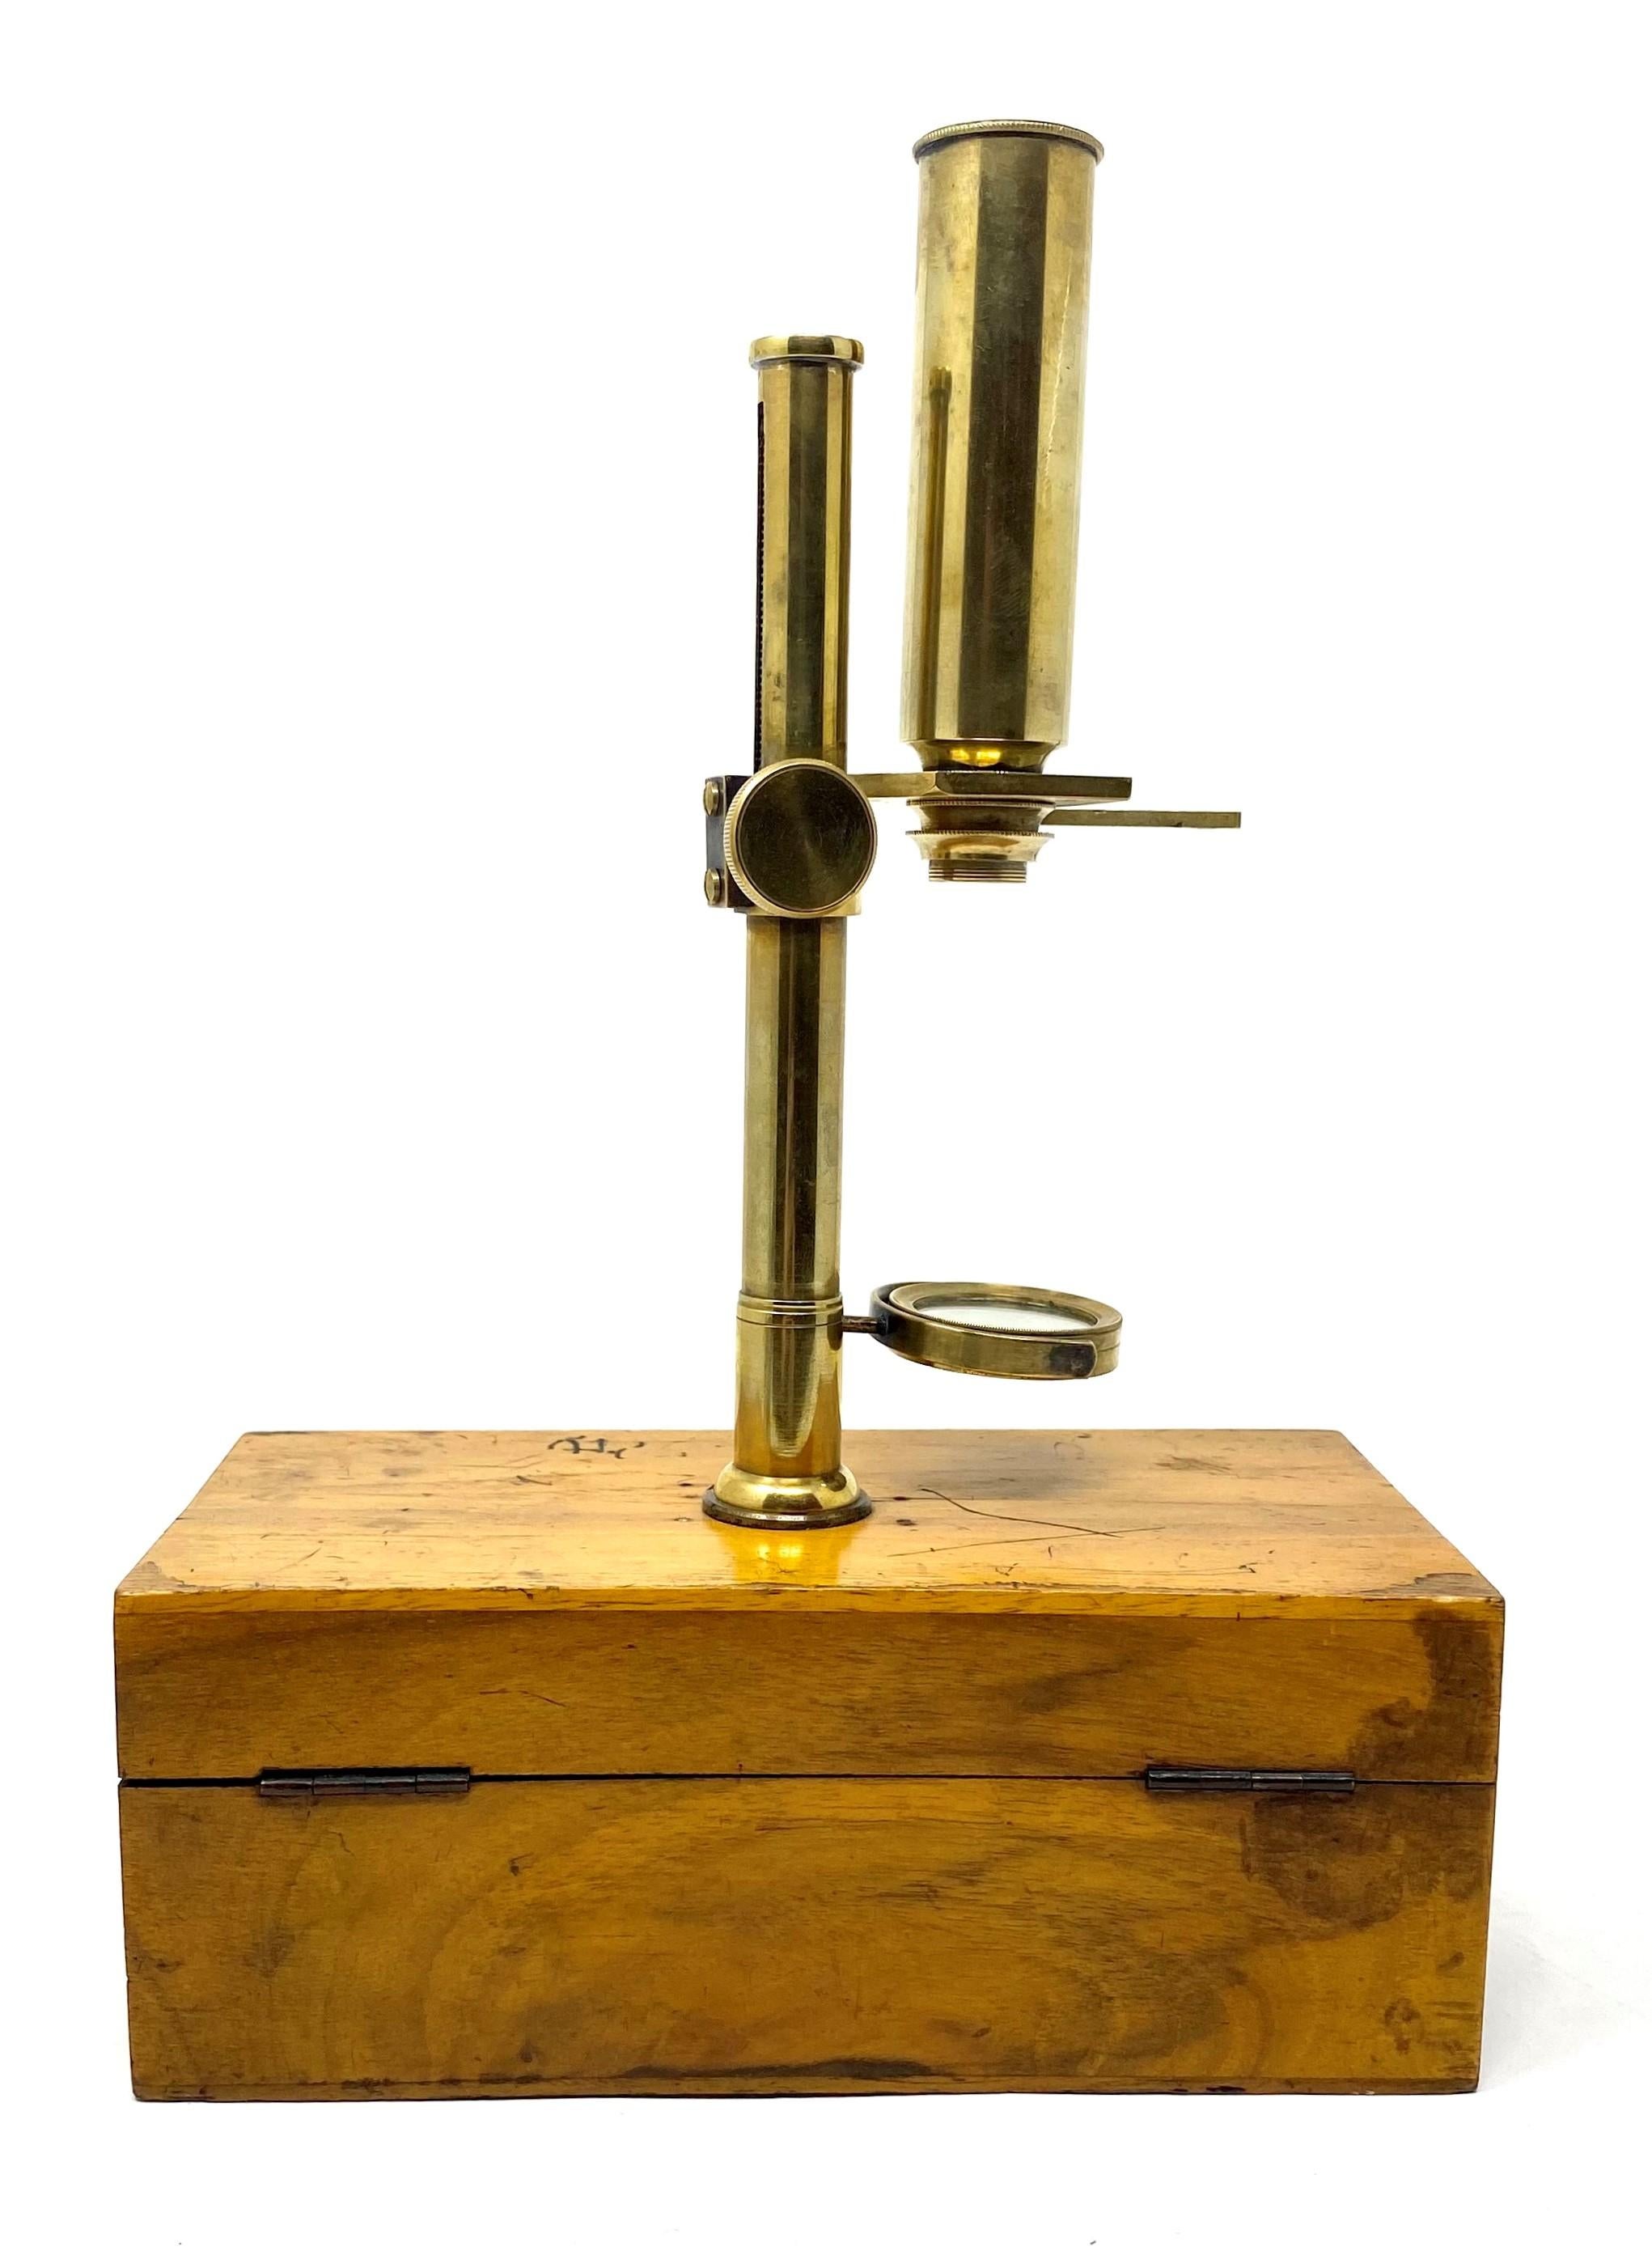 microscope invented by